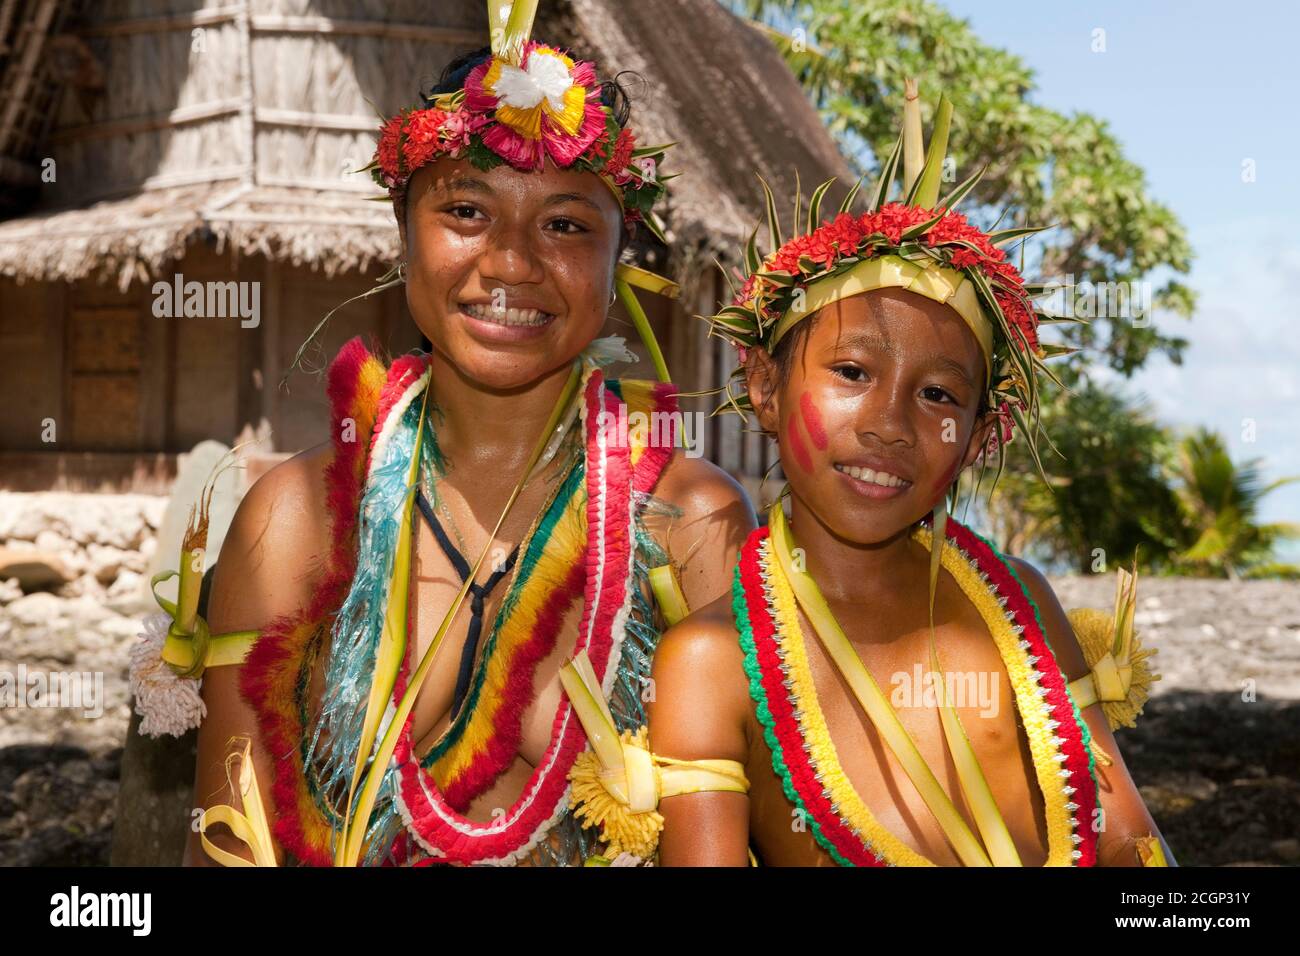 Young people with traditional flower arrangements, Yap Island, Micronesia Stock Photo